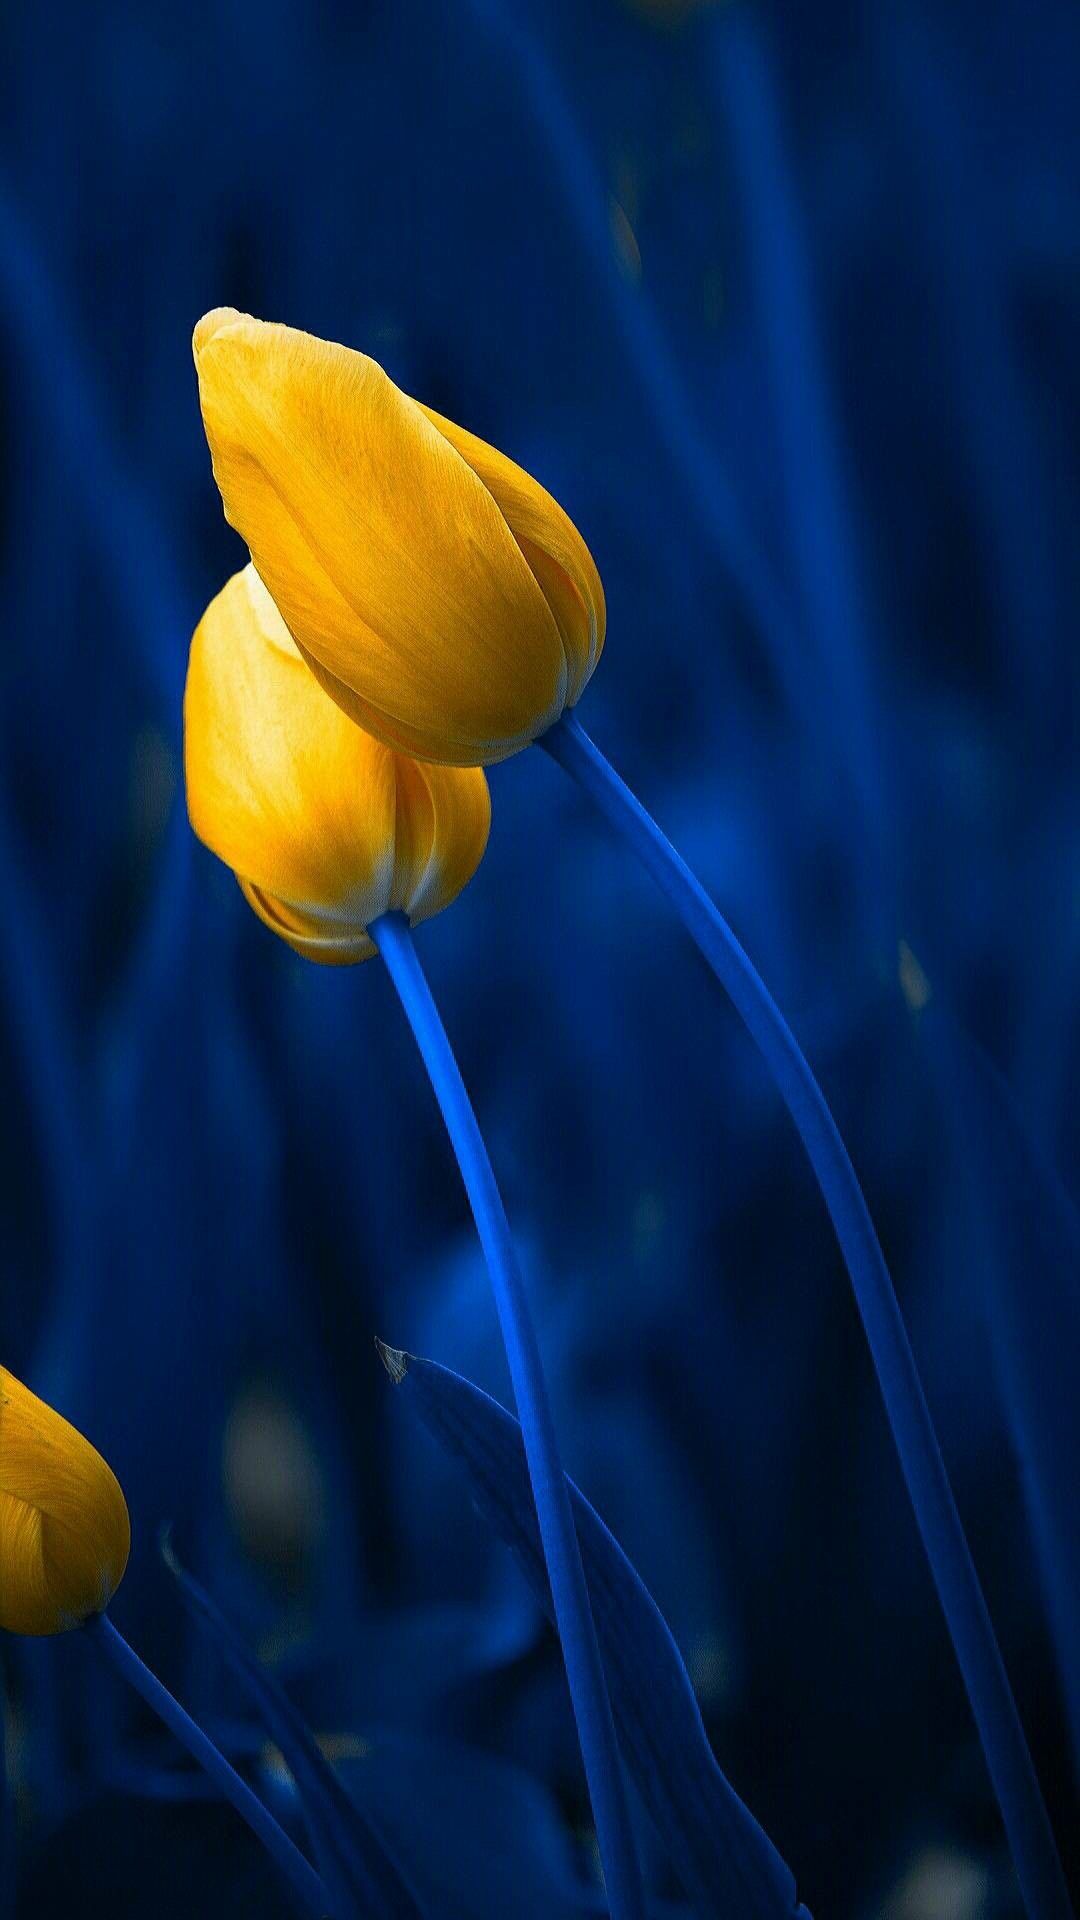 Blue and Yellow Flowers Wallpaper Free Blue and Yellow Flowers Background